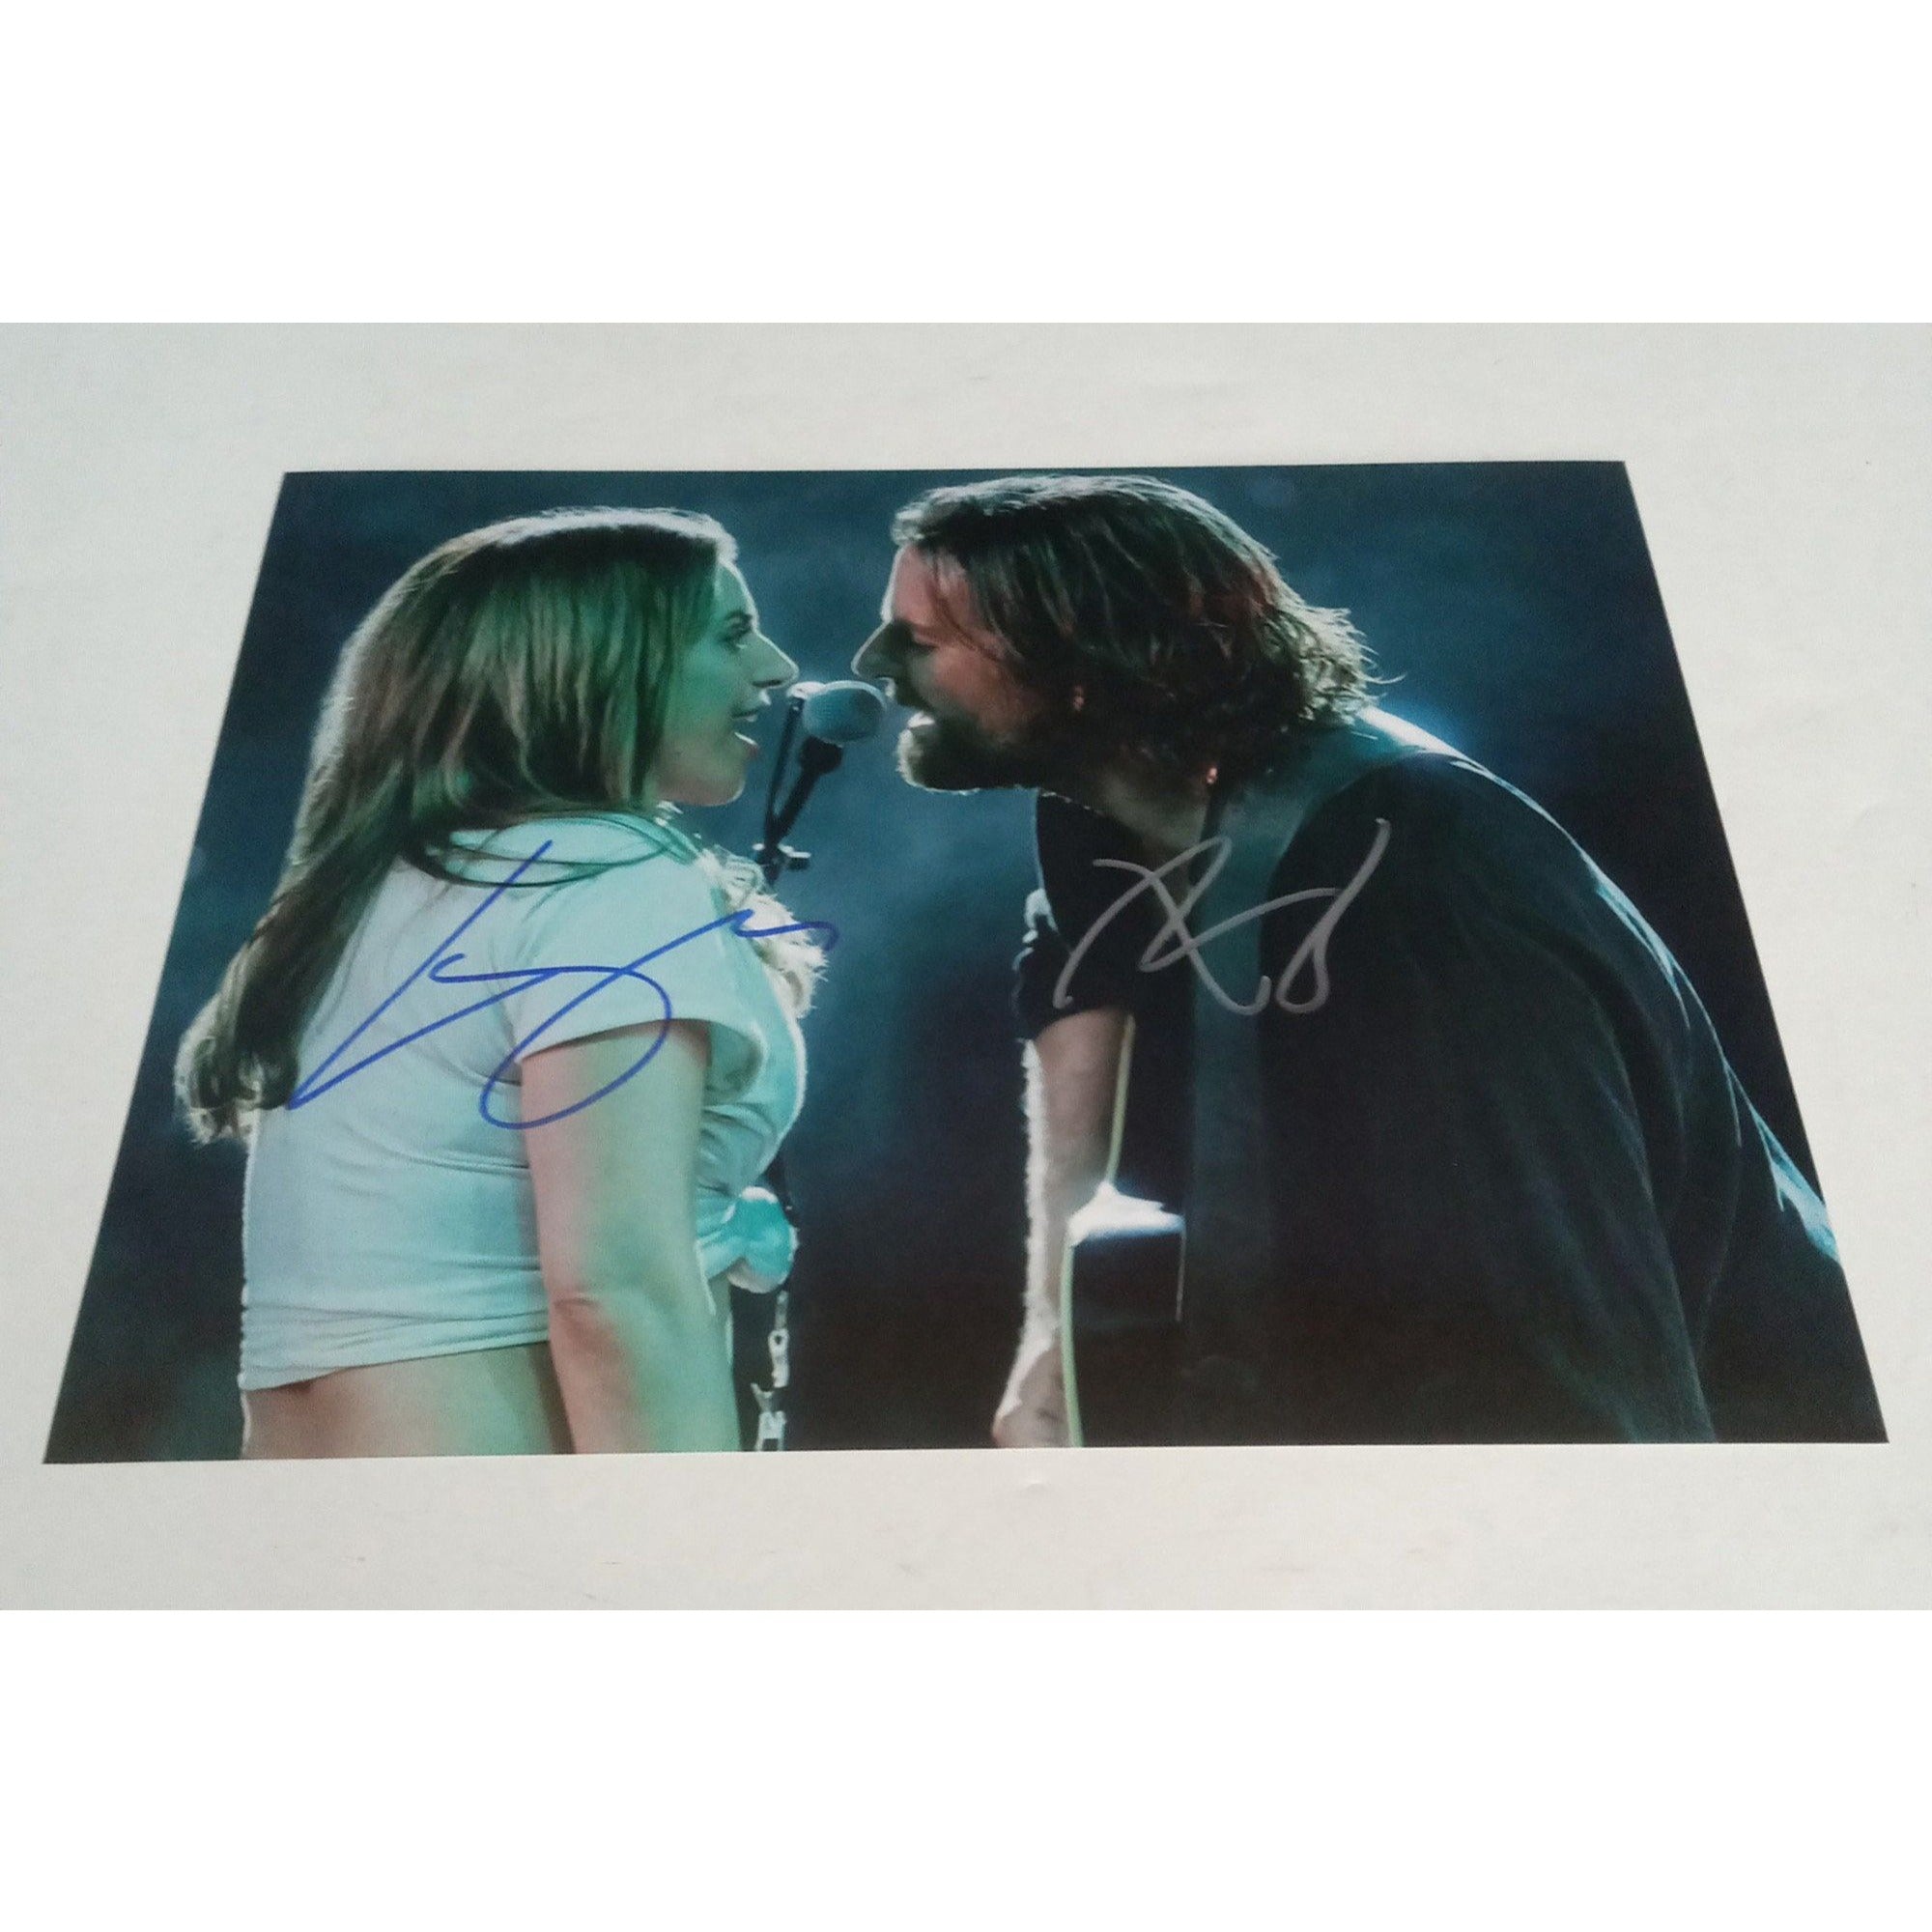 A Star is Born Lady Gaga and Bradley Cooper 8 by 10 signed photo with proof